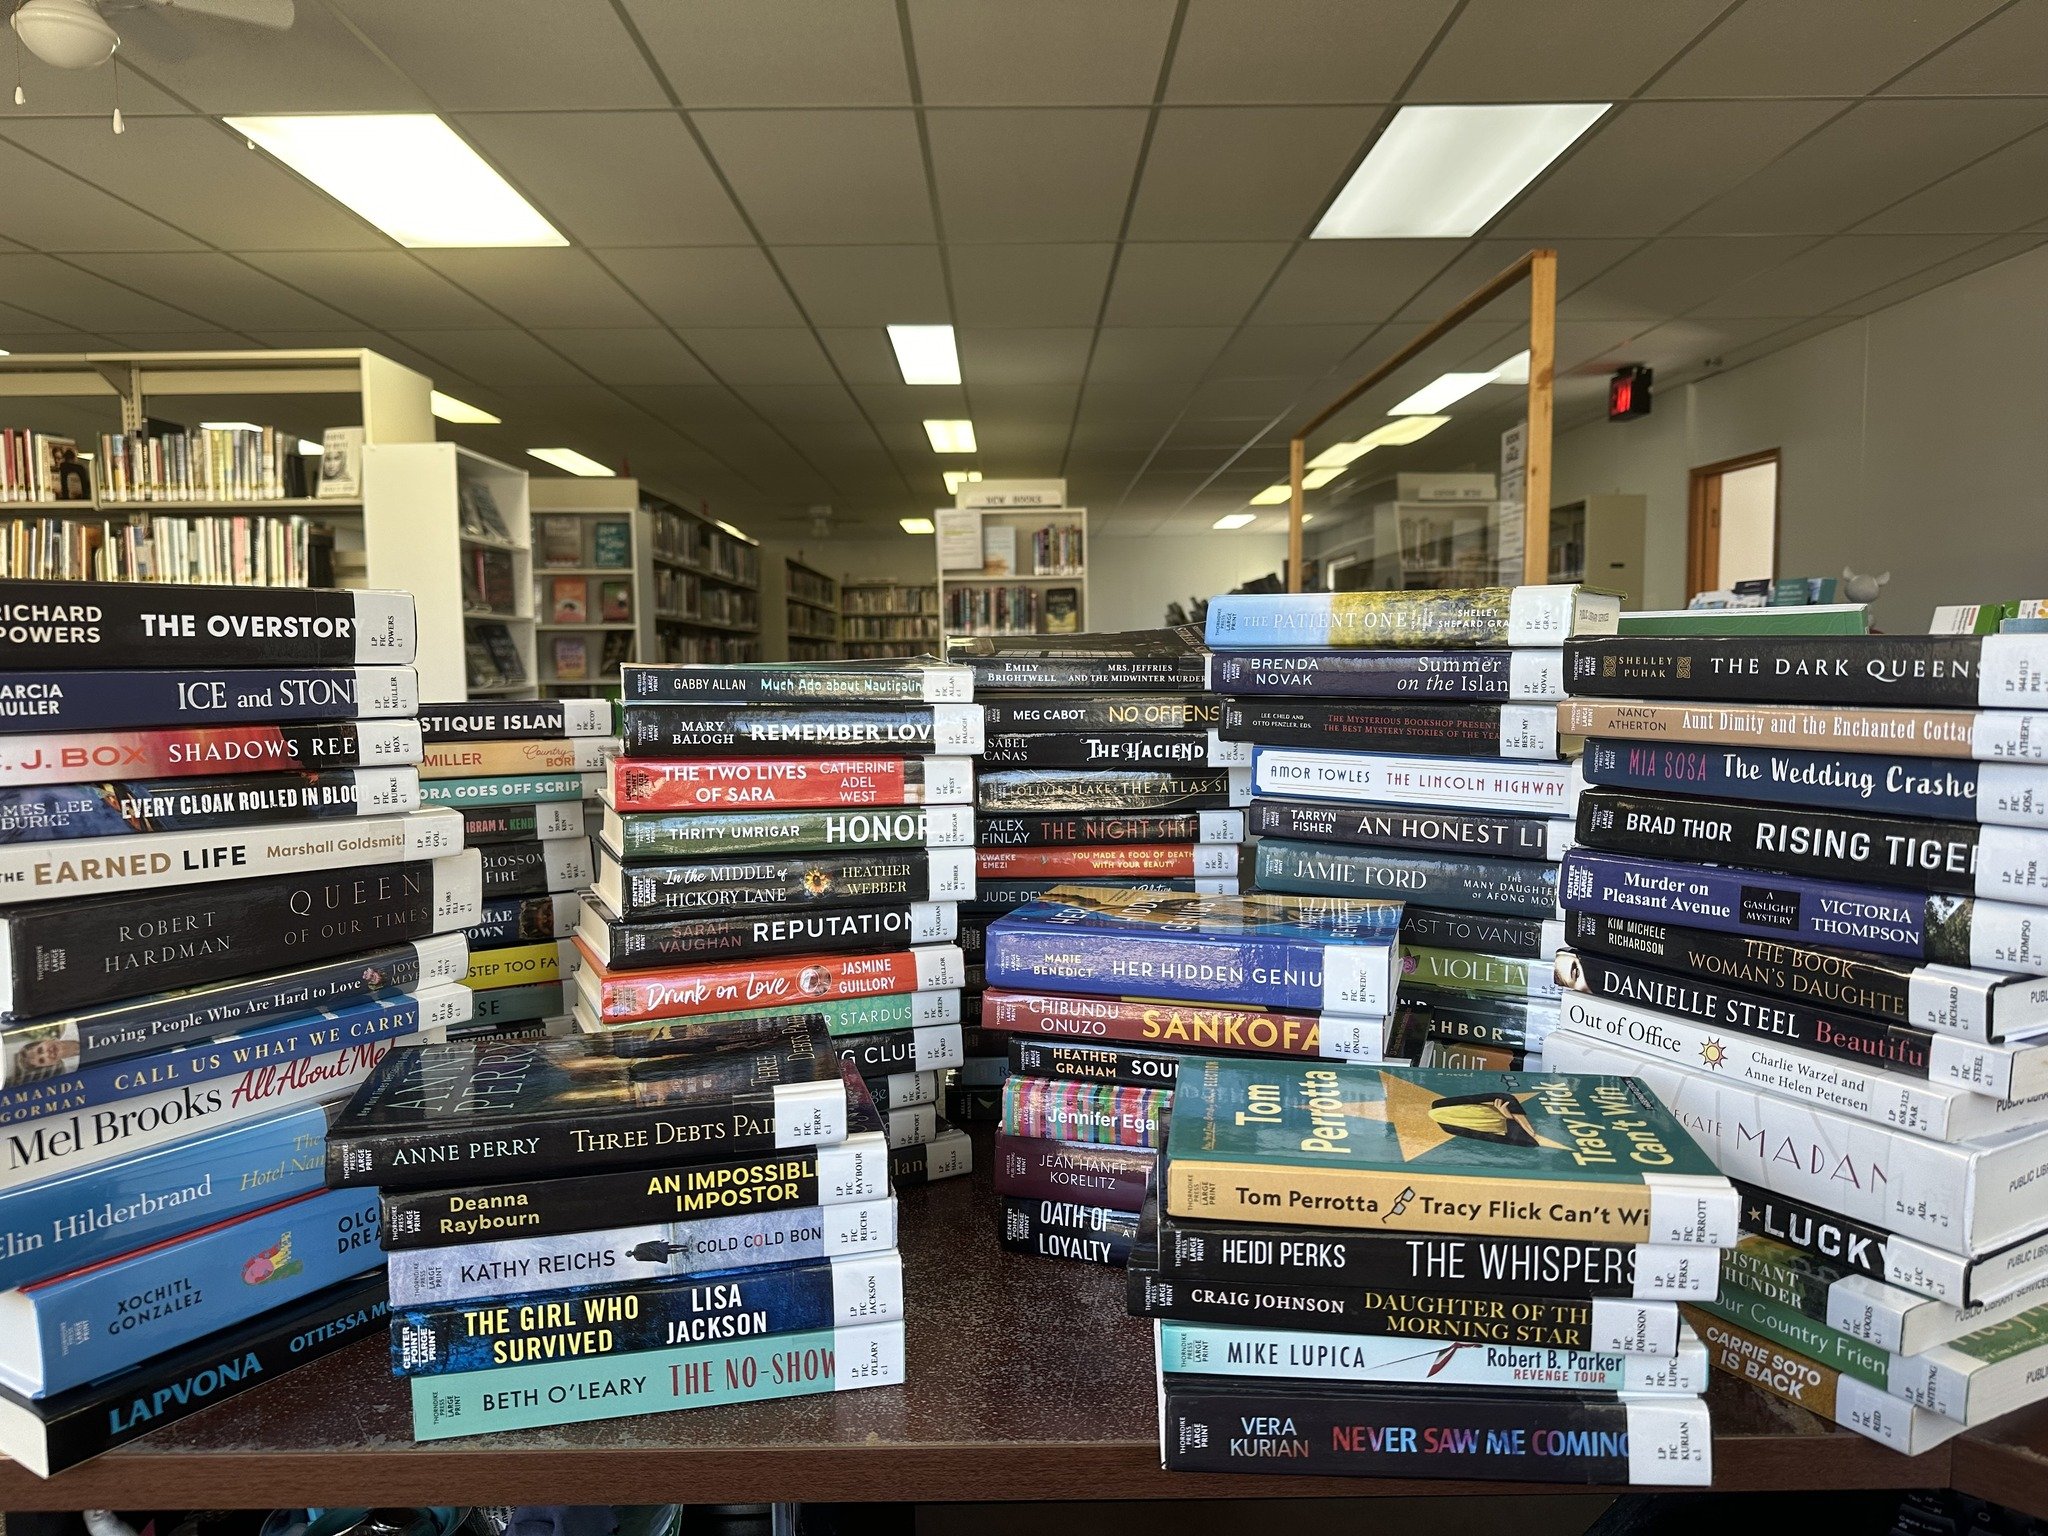 Our spring large print rotation block has arrived!  From beach reads to biographies, historical fiction to mysteries, there's something for everyone to enjoy over the summer!☀️🌳📖